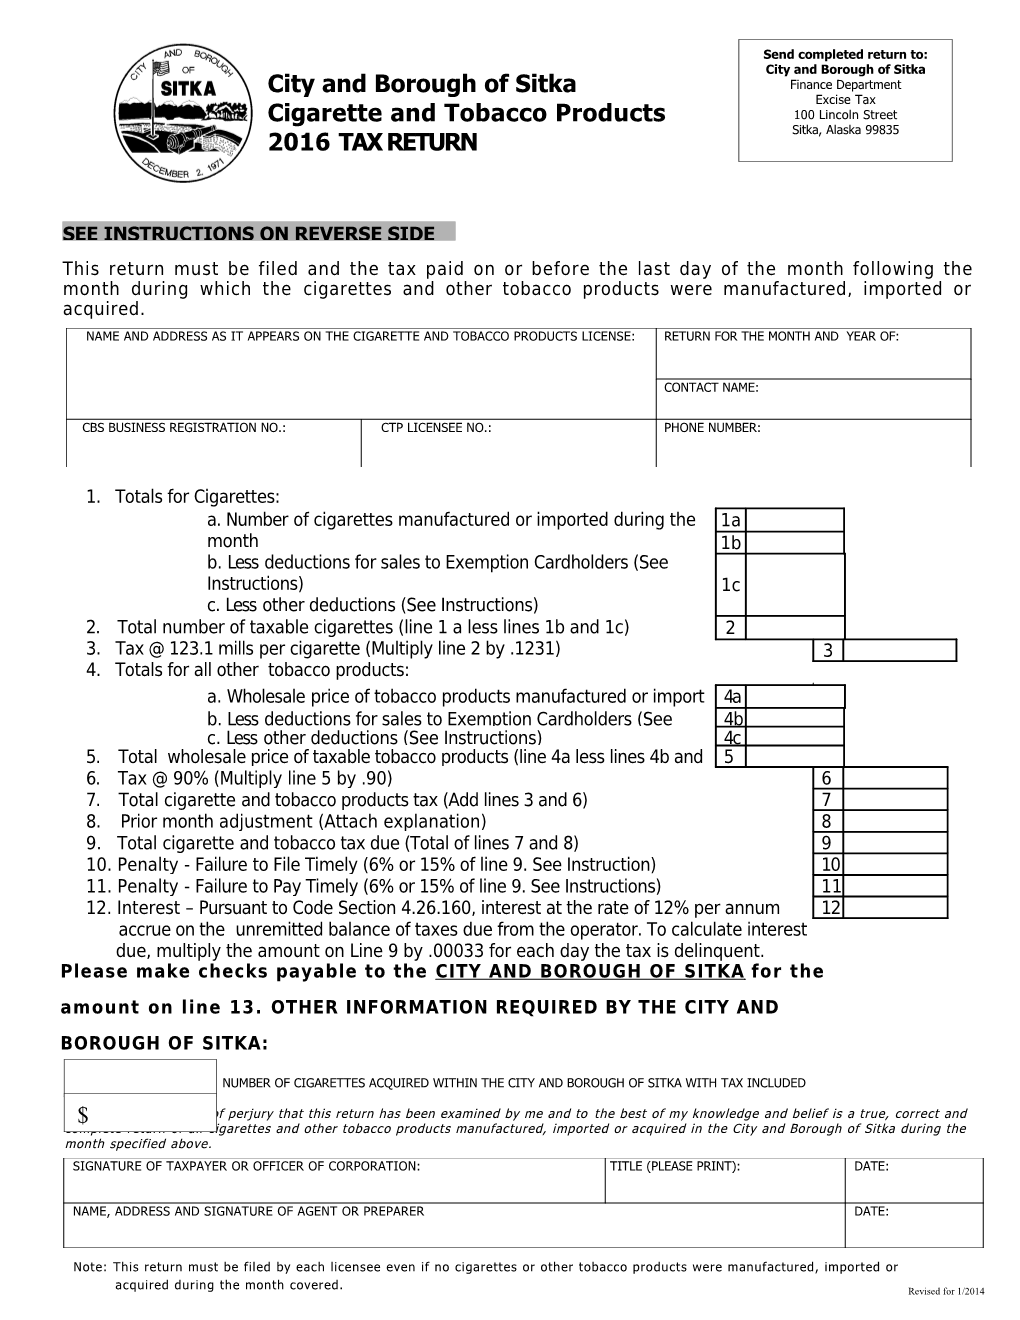 City and Borough of Sitka Cigarette and Tobacco Products 2016TAX RETURN